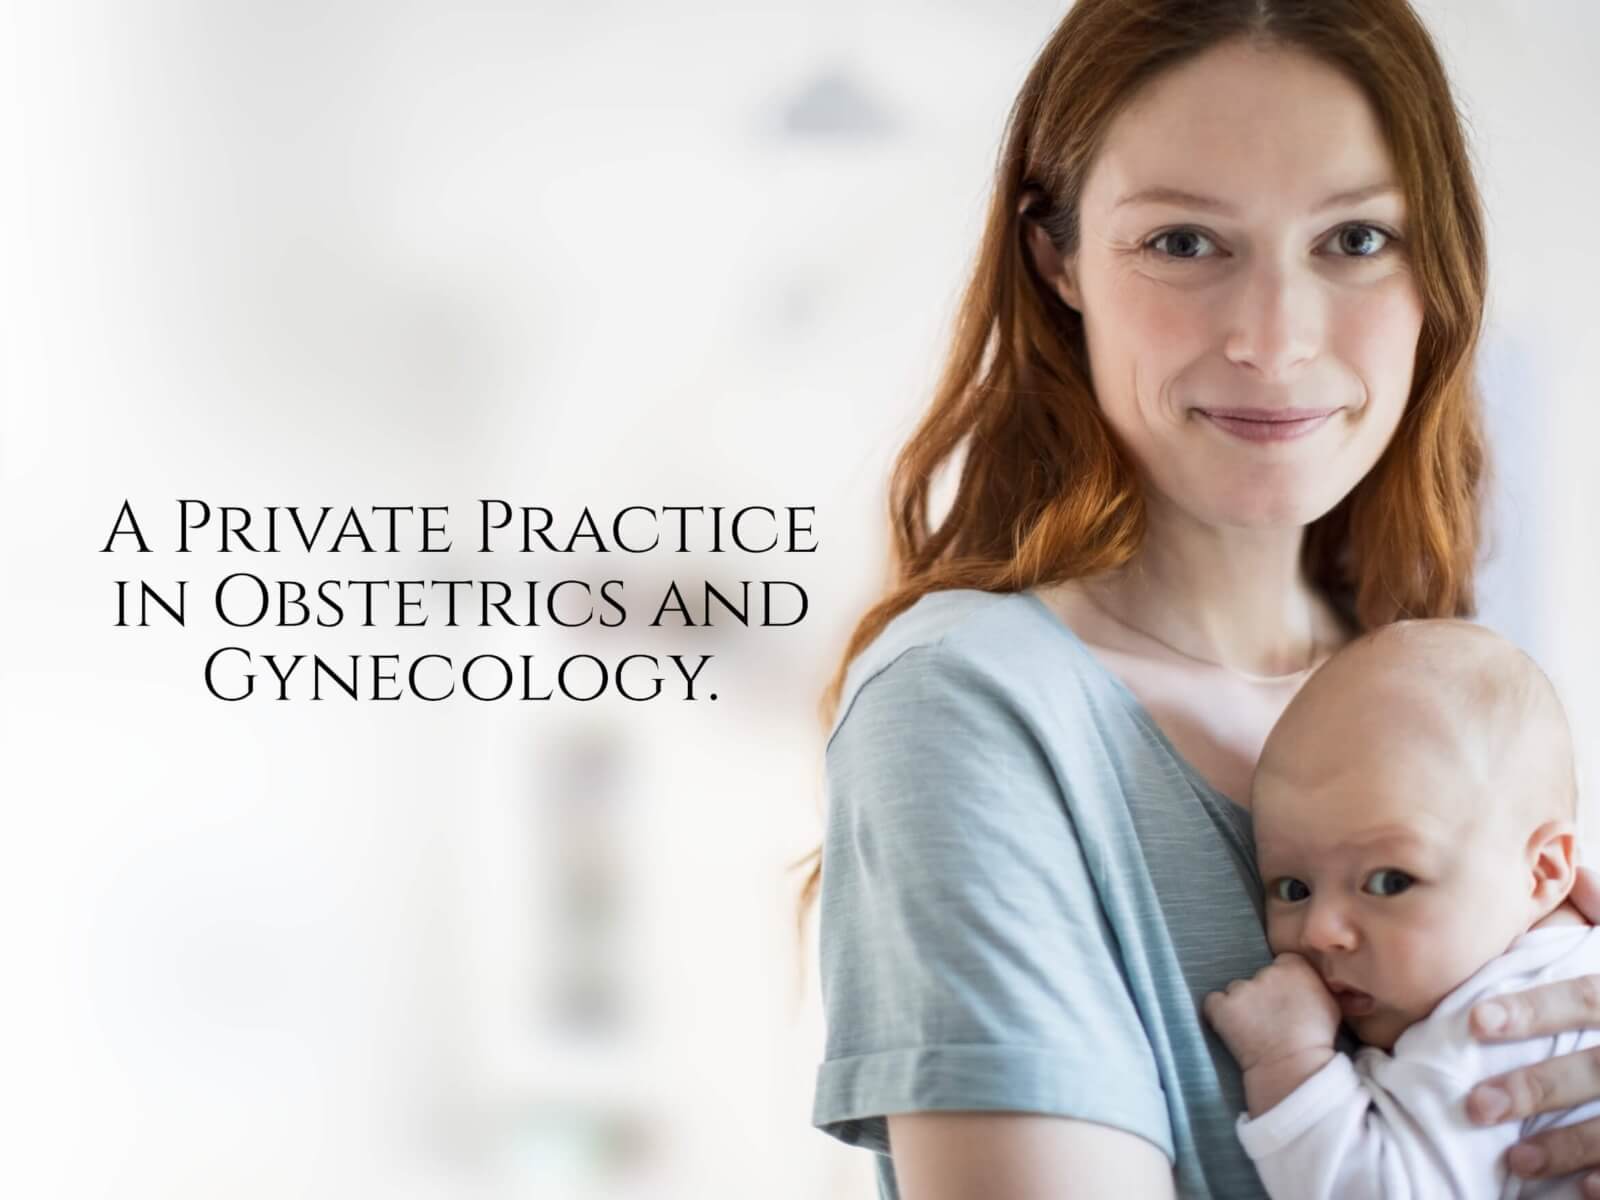 A Private Practice in Obstetrics and Gynecology.